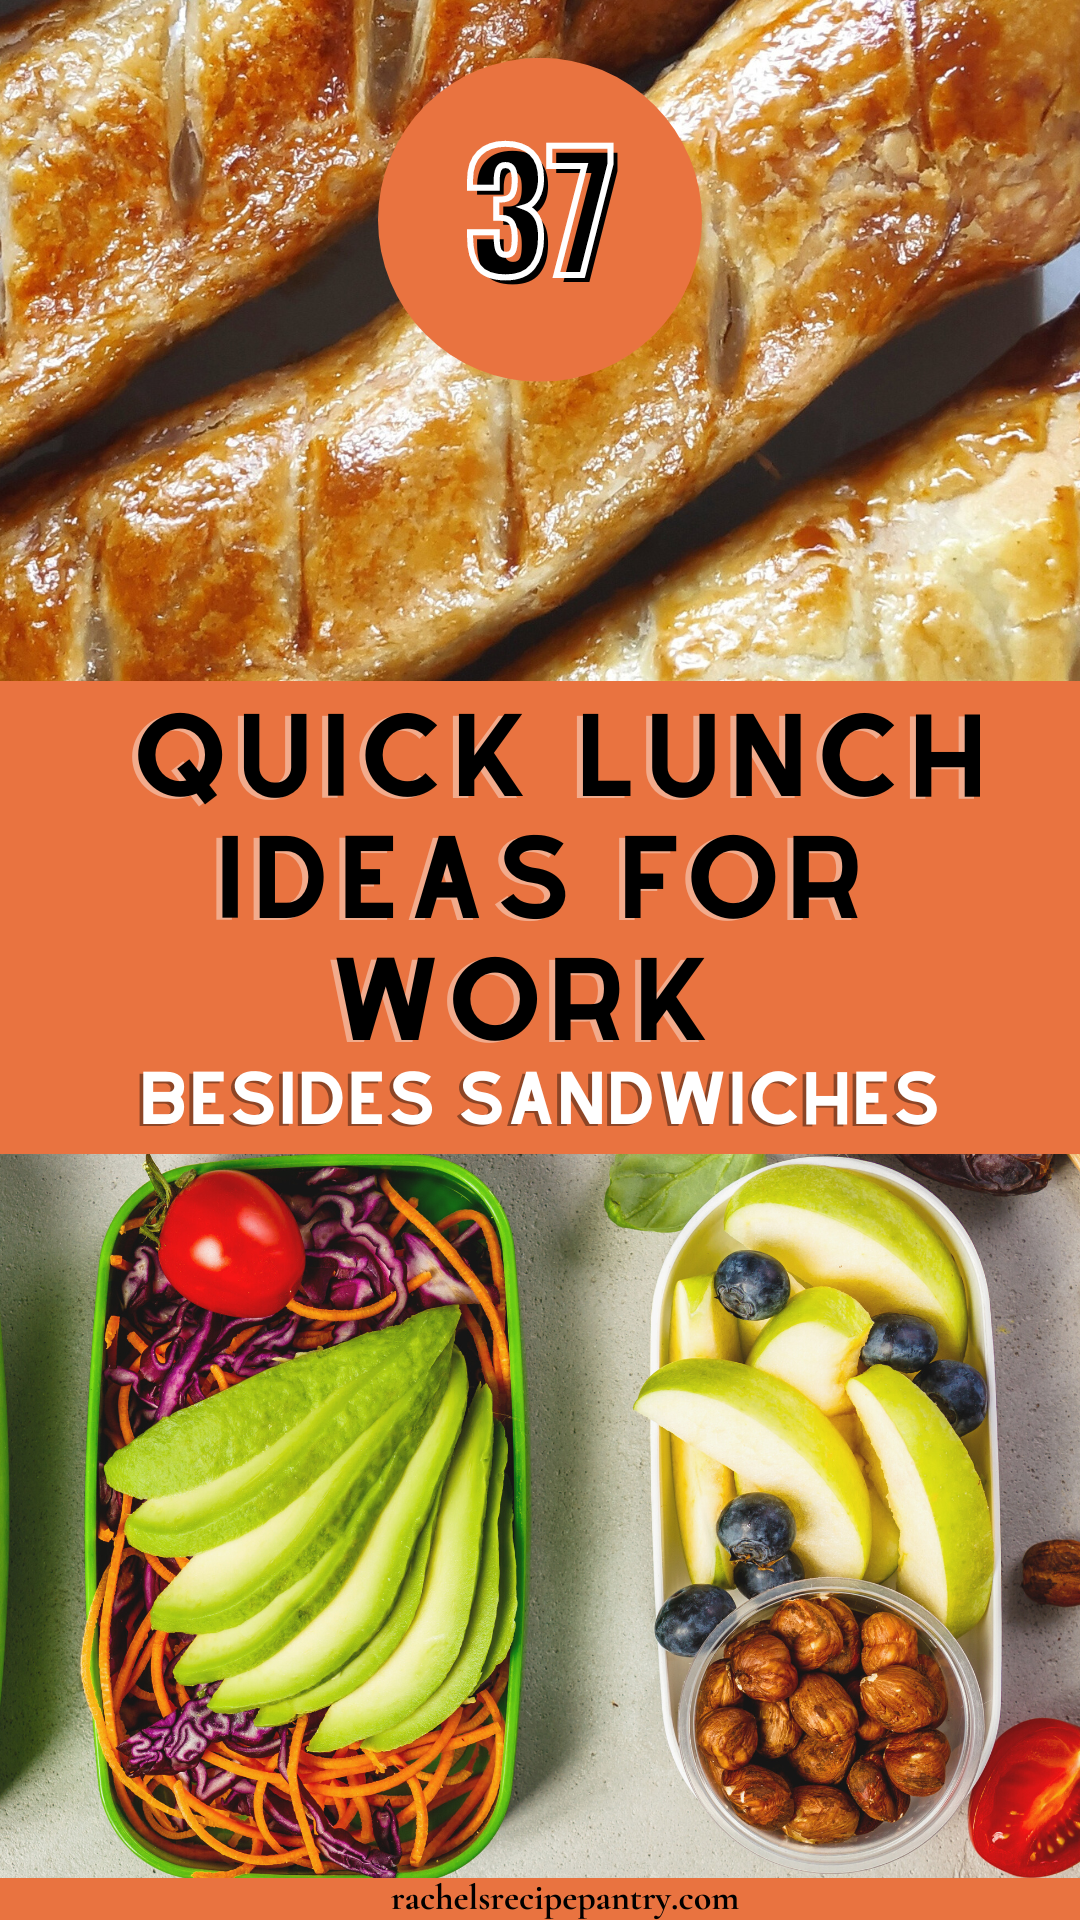 37 Simple And Quick Lunch Ideas For Work Besides Sandwiches